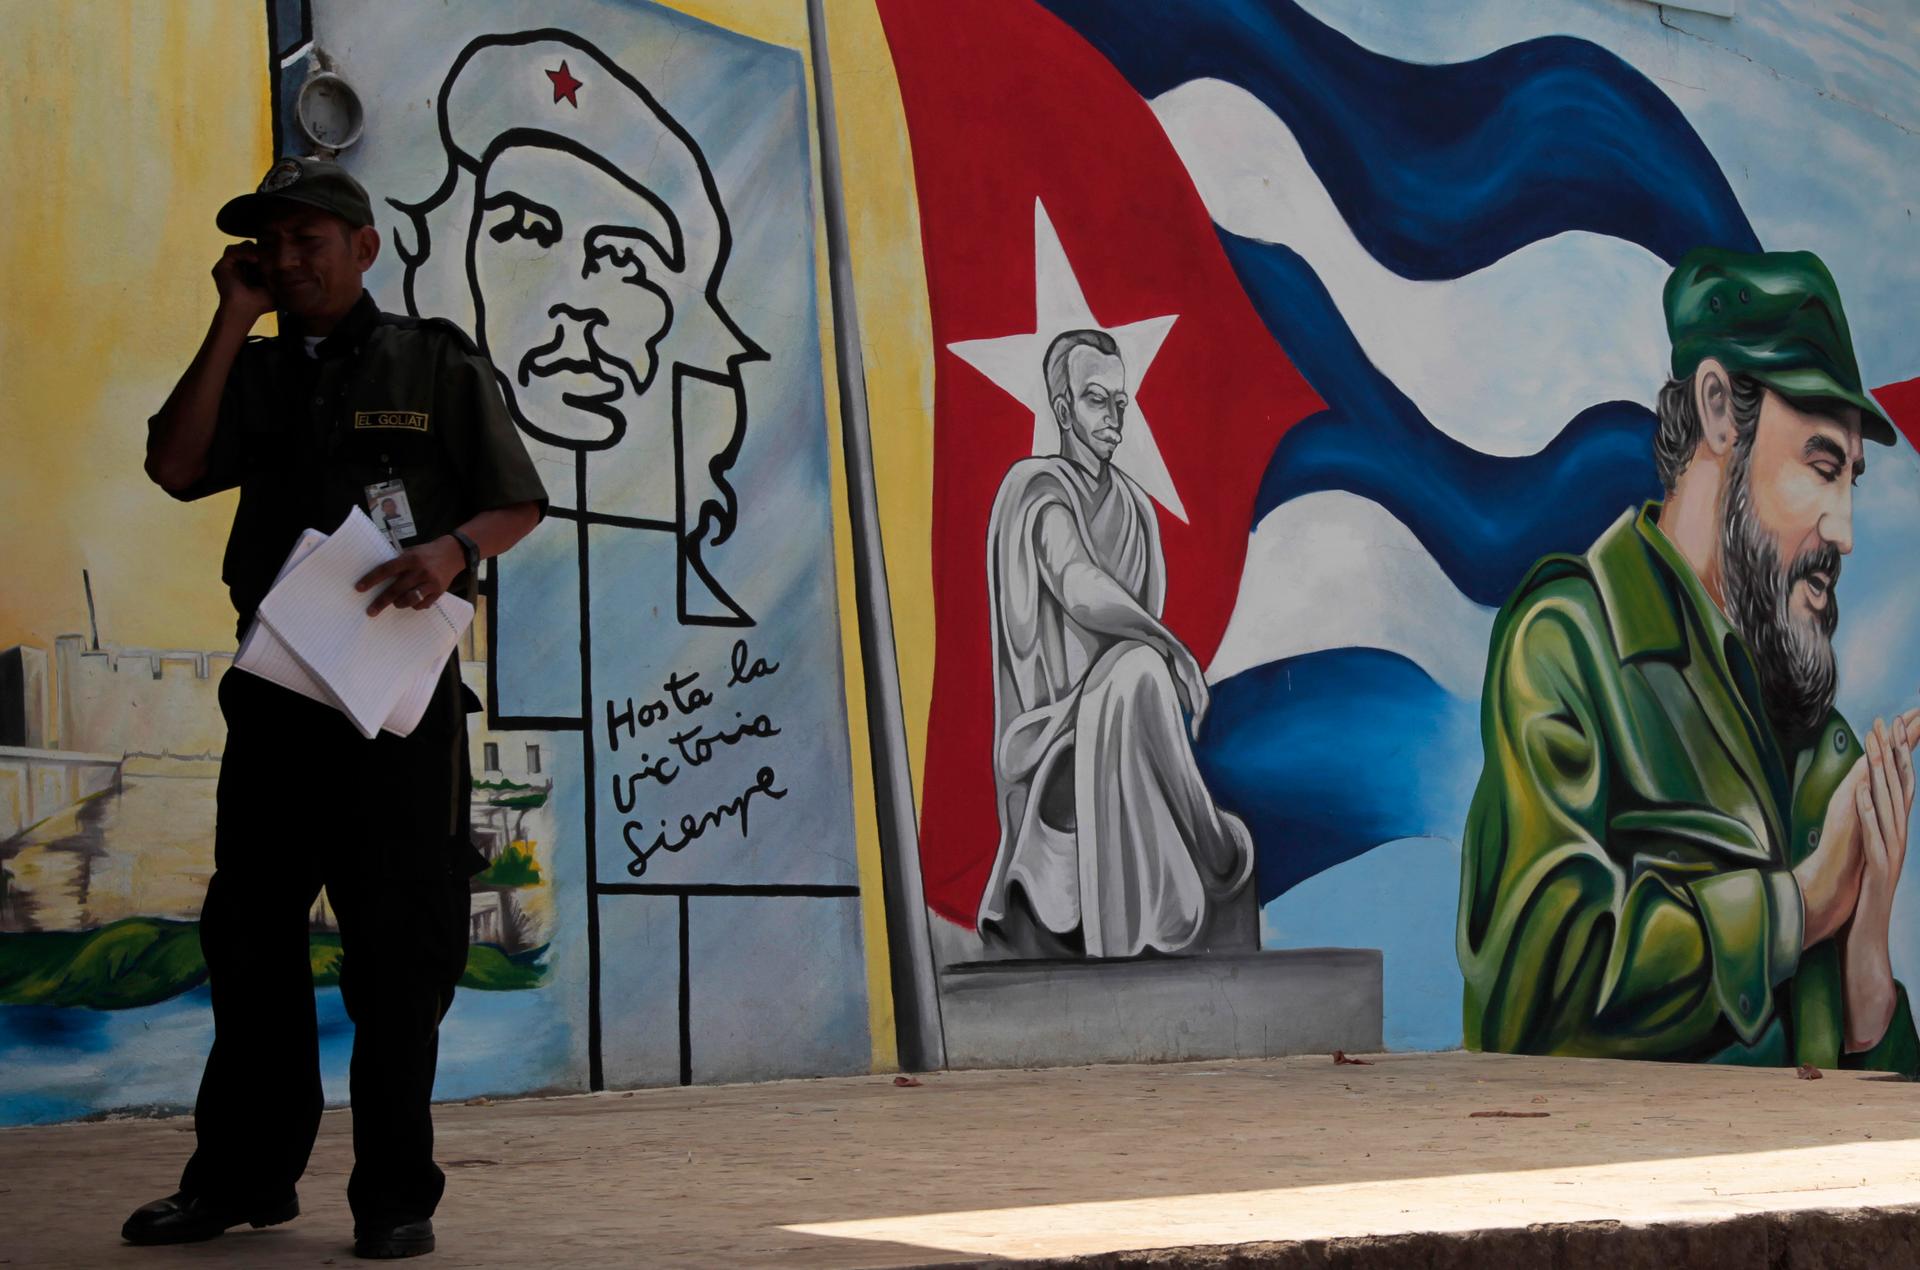 Man makes cell phone call in front of Cuban independence mural in Havana in 2013.